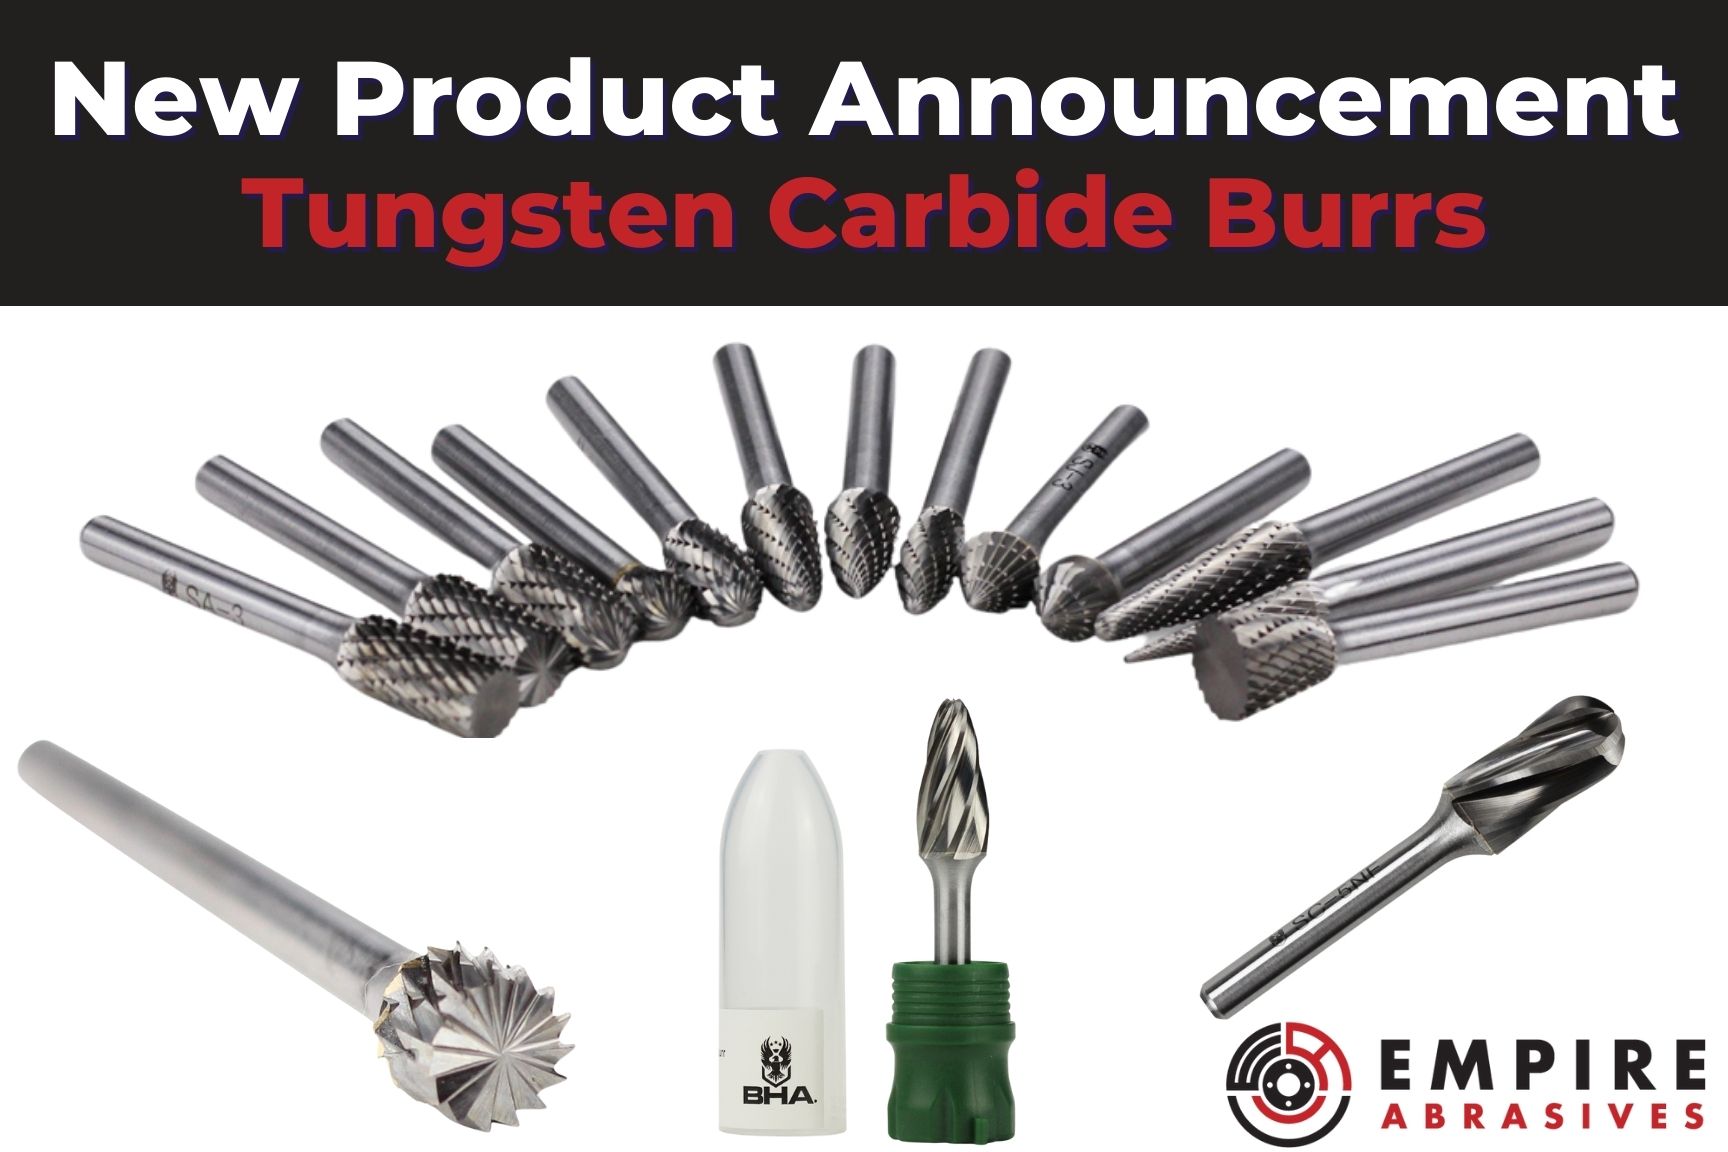 New Product Line - Tungsten Carbide Burrs at Empire Abrasives